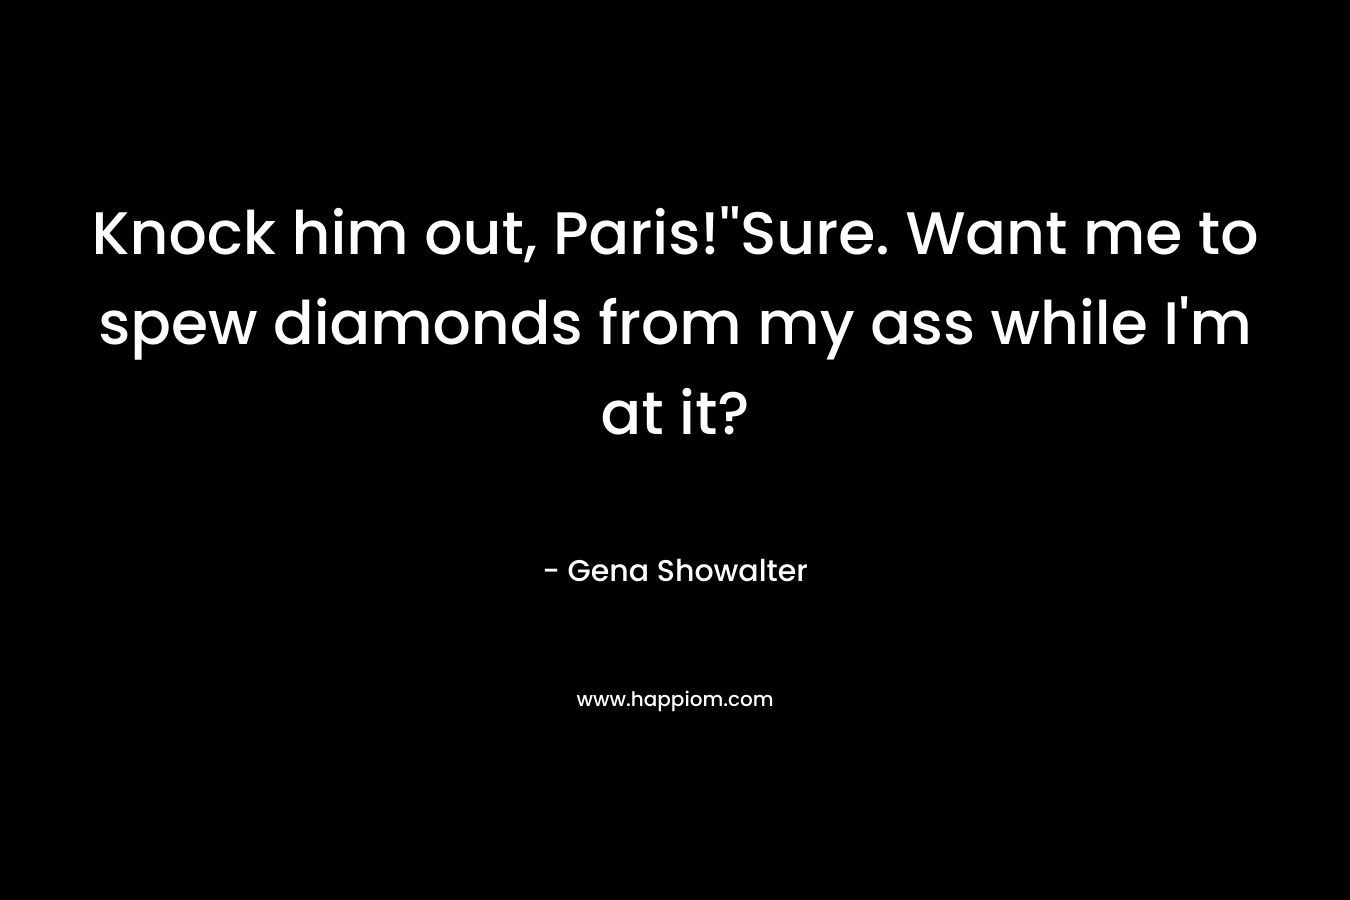 Knock him out, Paris!''Sure. Want me to spew diamonds from my ass while I'm at it?